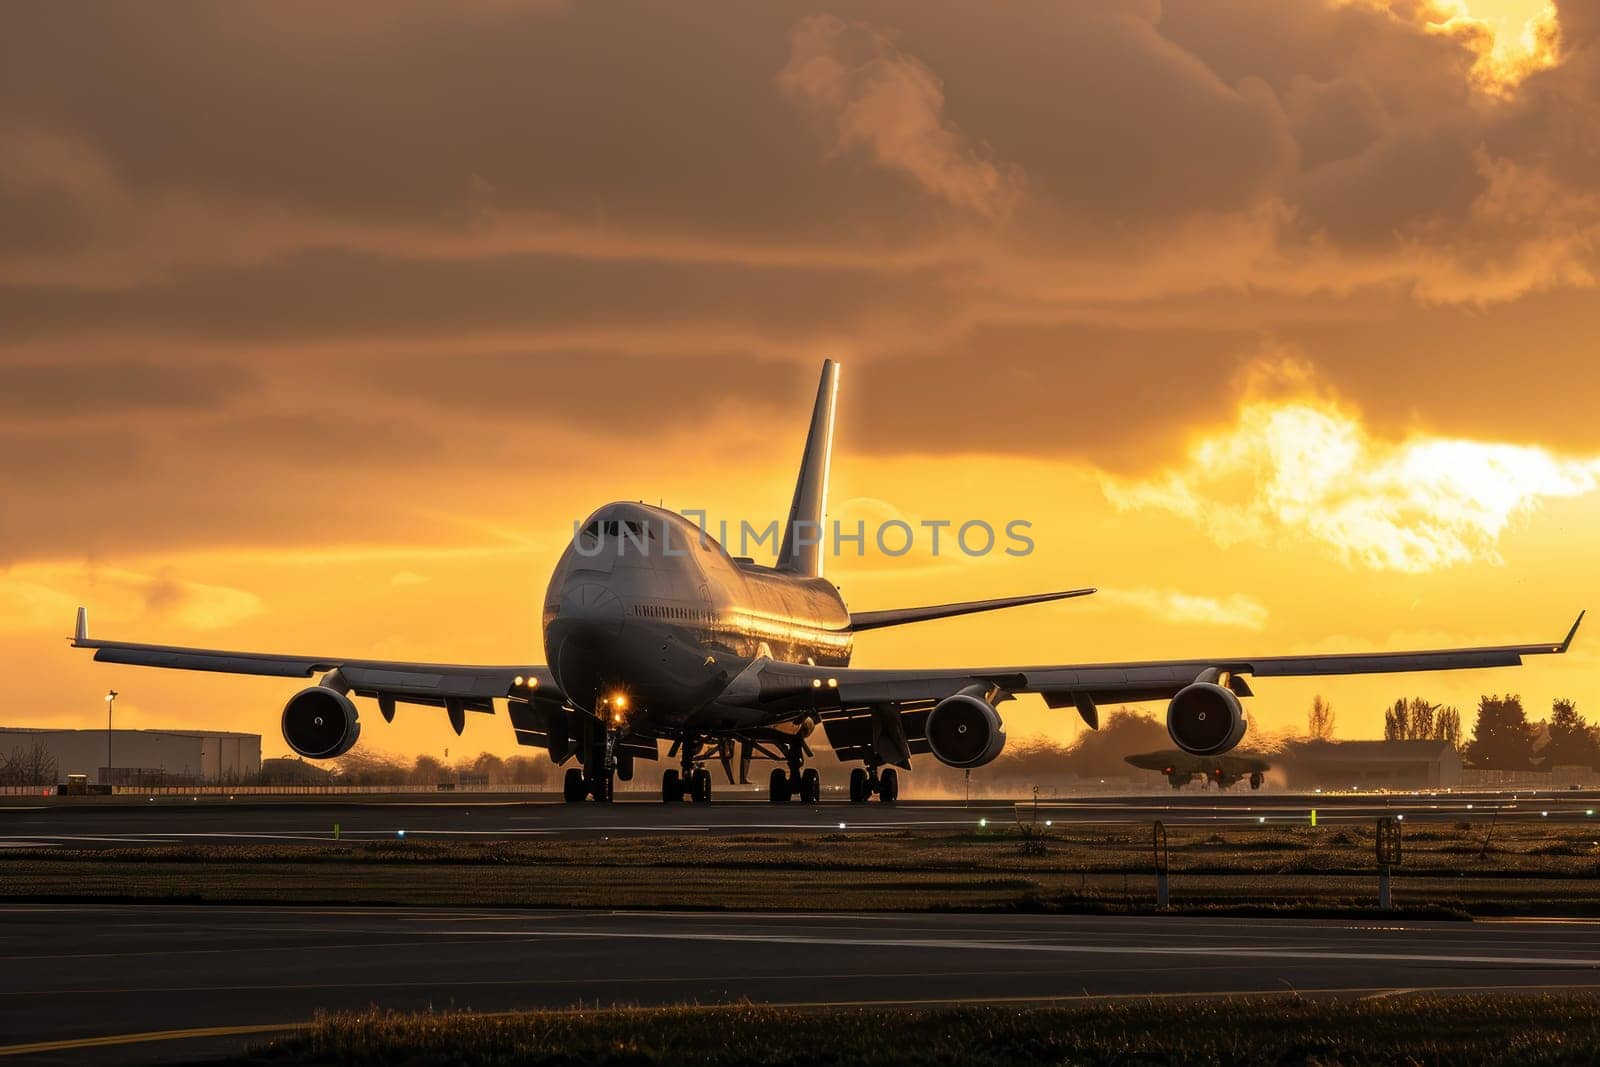 A majestic airplane illuminated by the setting sun as it prepares for takeoff on a runway